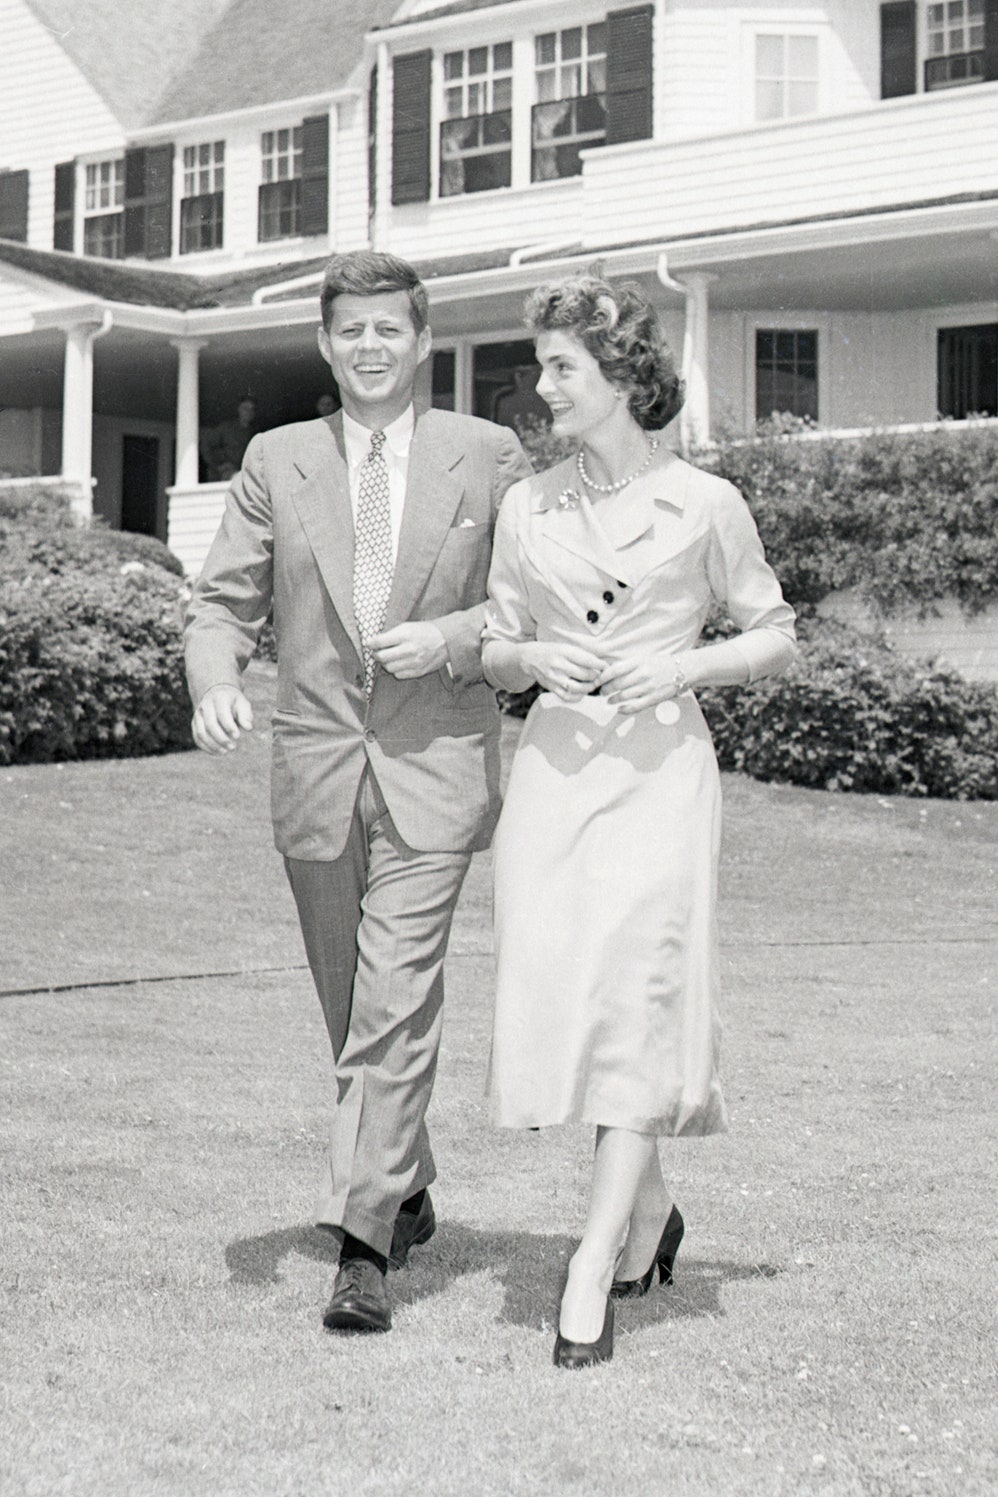 Senator John F. Kennedy and Miss Jacqueline Bouvier stroll across the lawn of his family's home after announcing their...